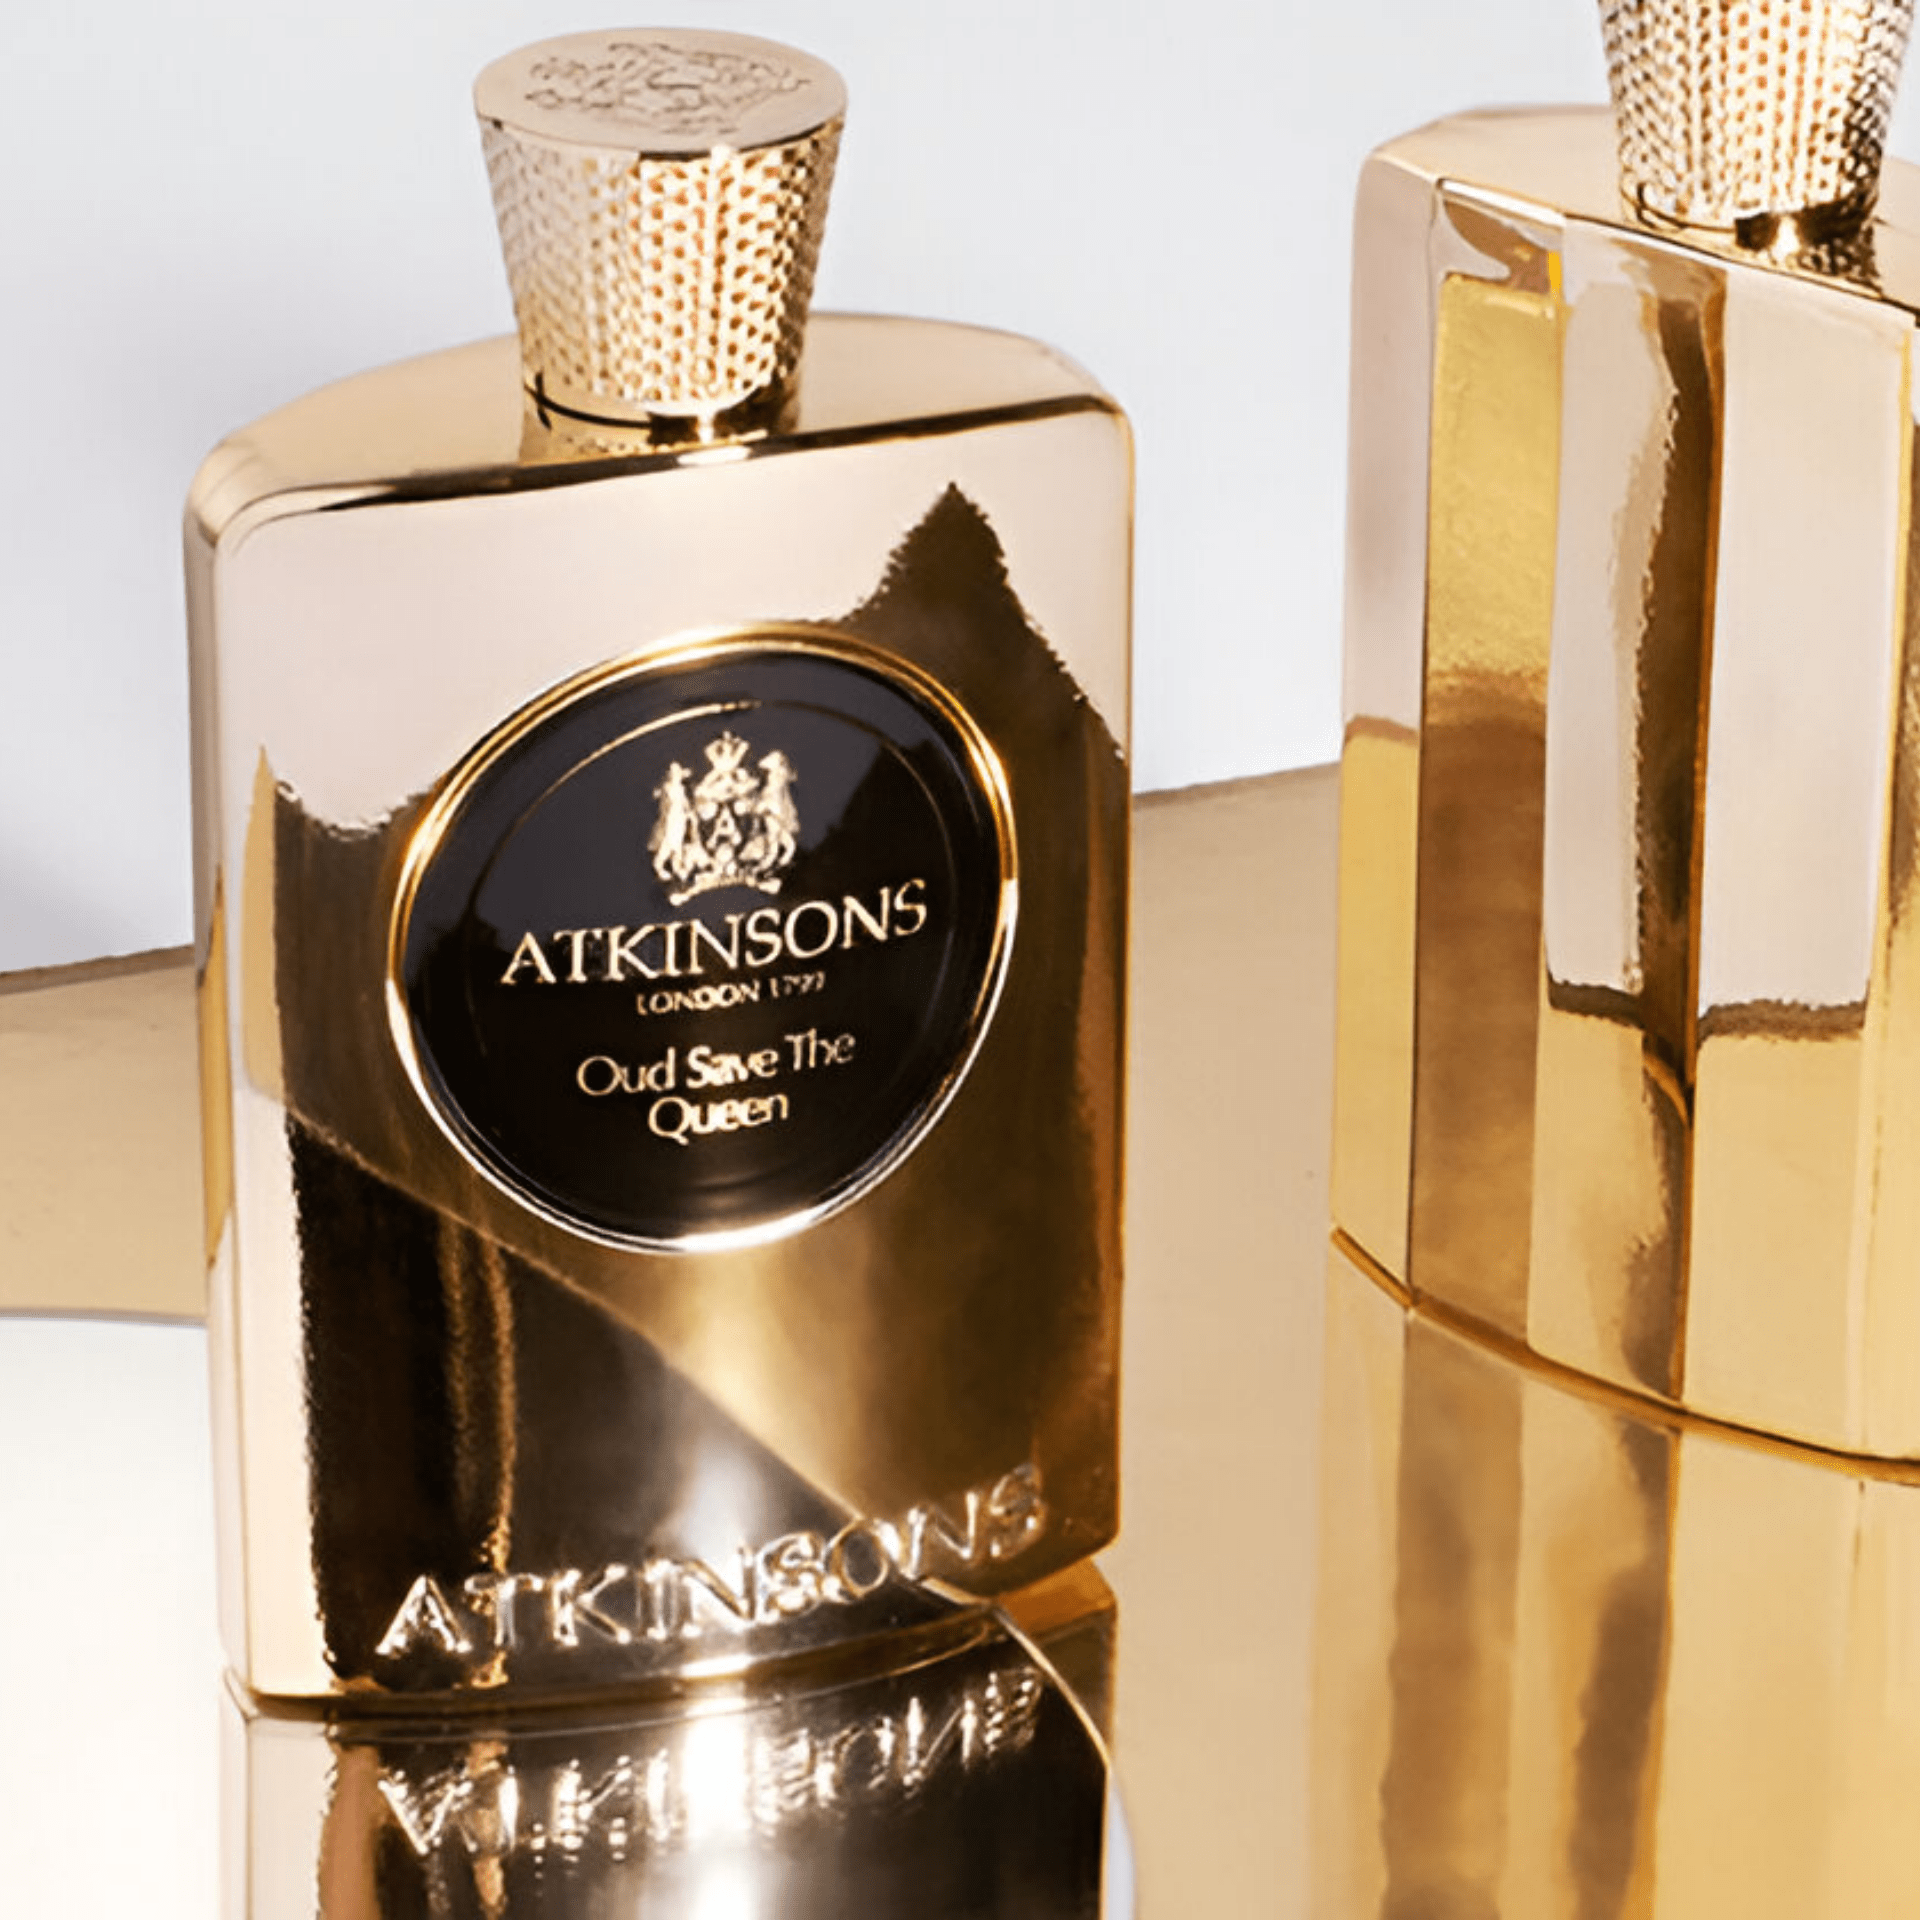 Atkinsons Oud Save The Queen EDP | My Perfume Shop Australia